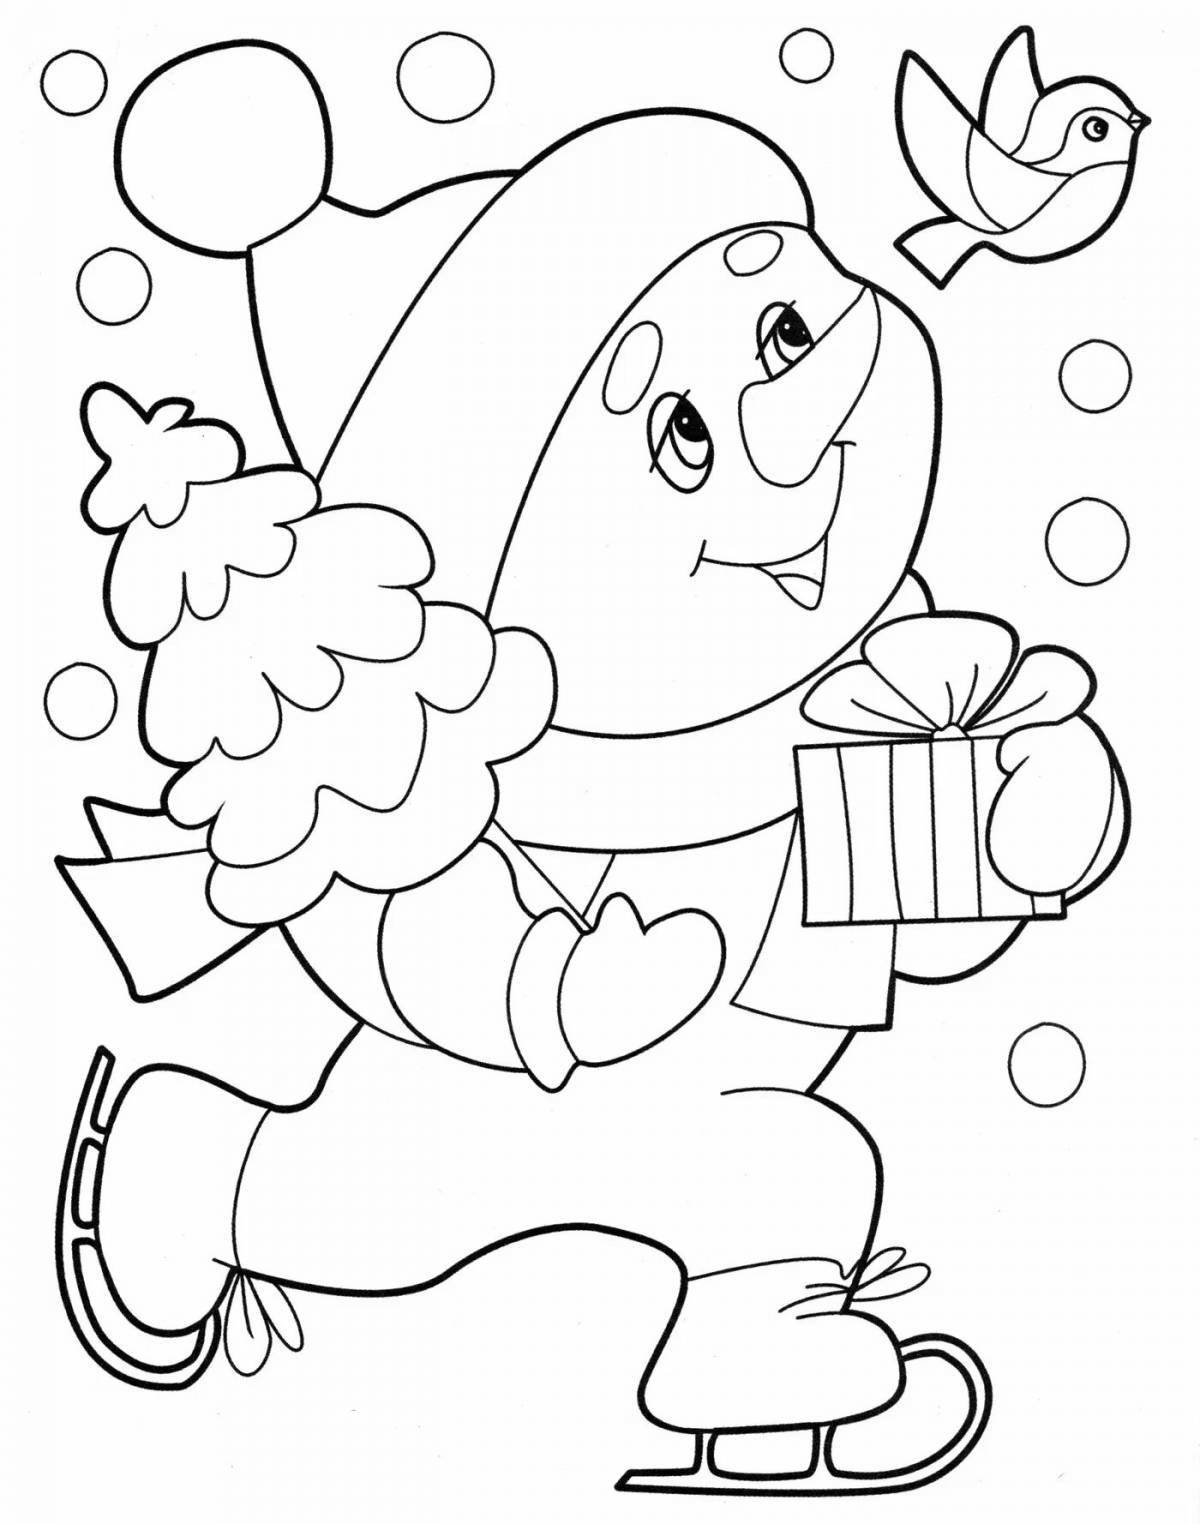 Exciting snowman skating coloring book for kids